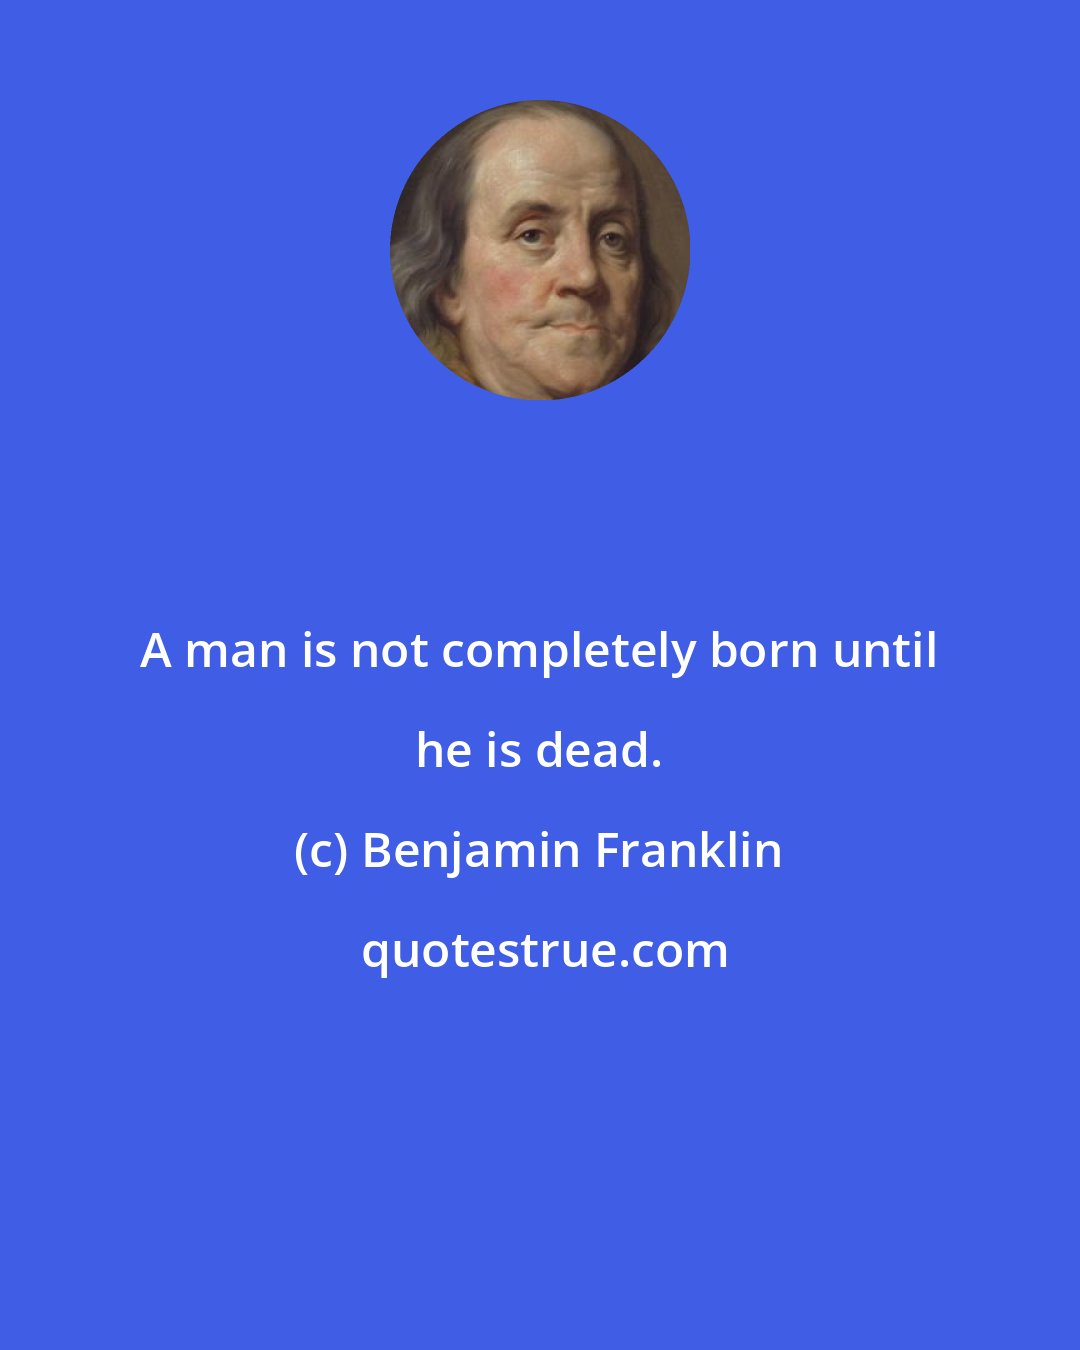 Benjamin Franklin: A man is not completely born until he is dead.